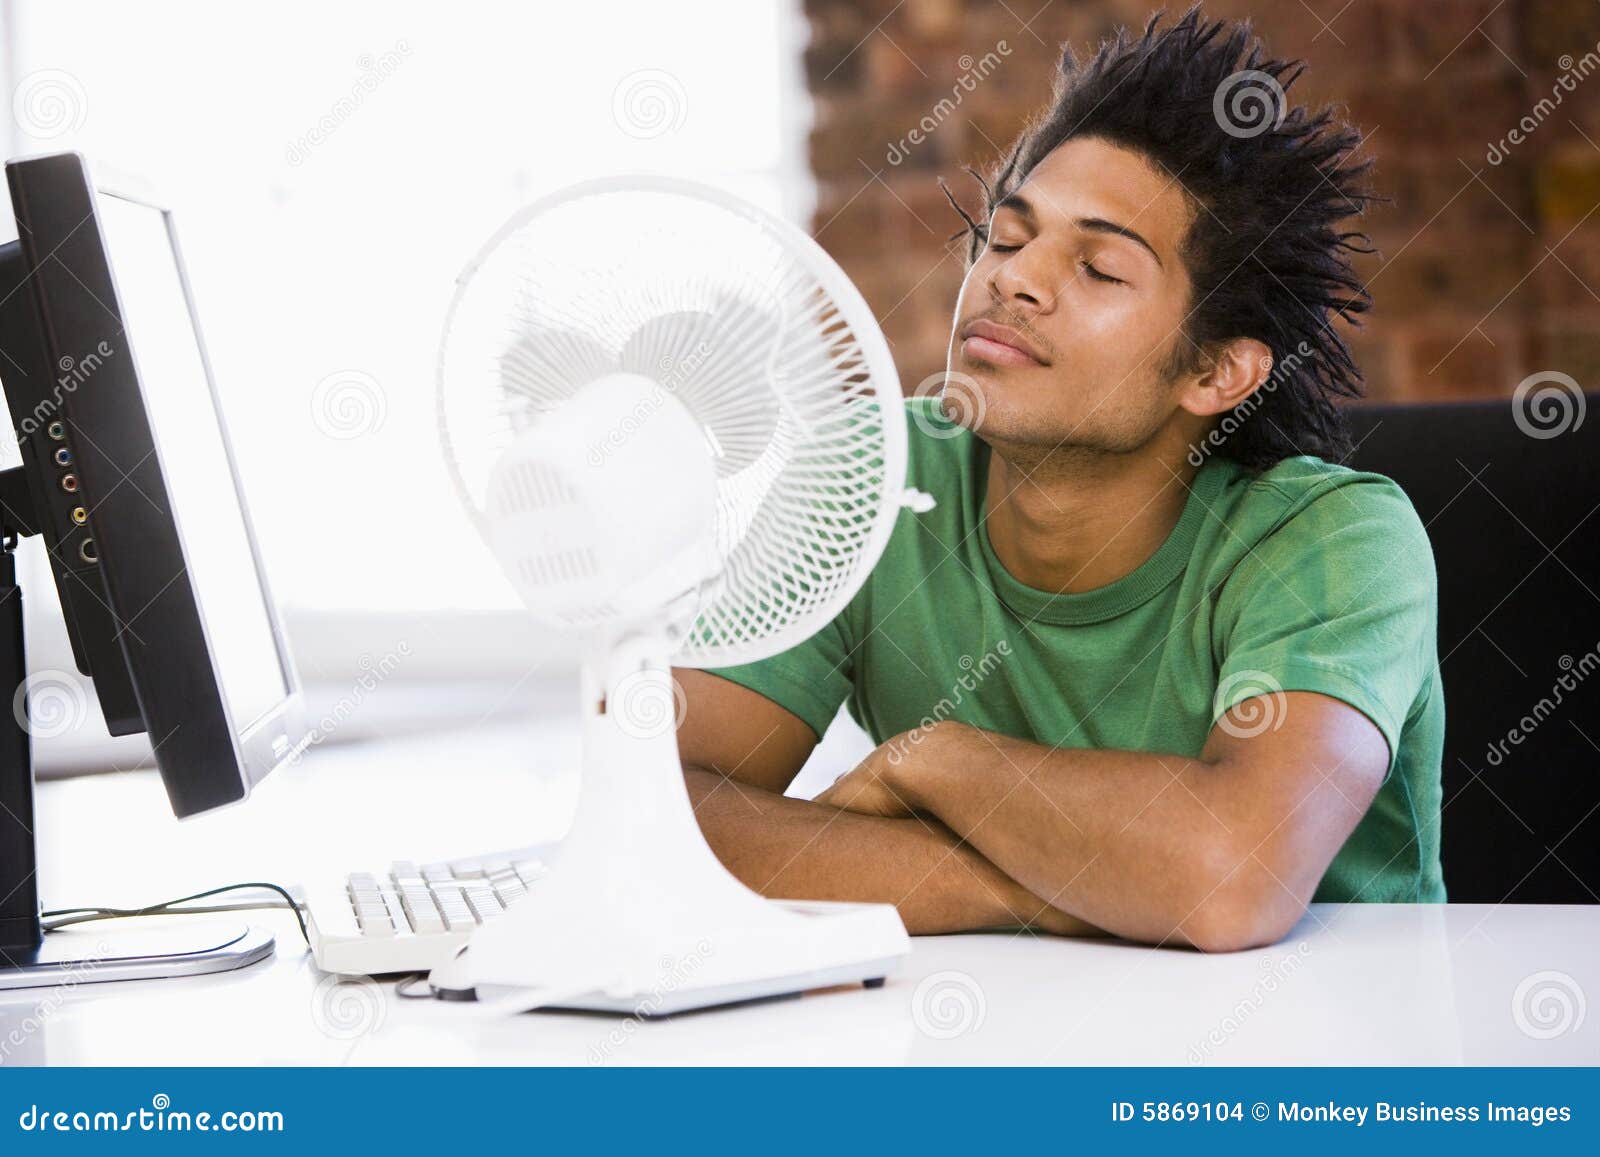 businessman in office with computer and fan